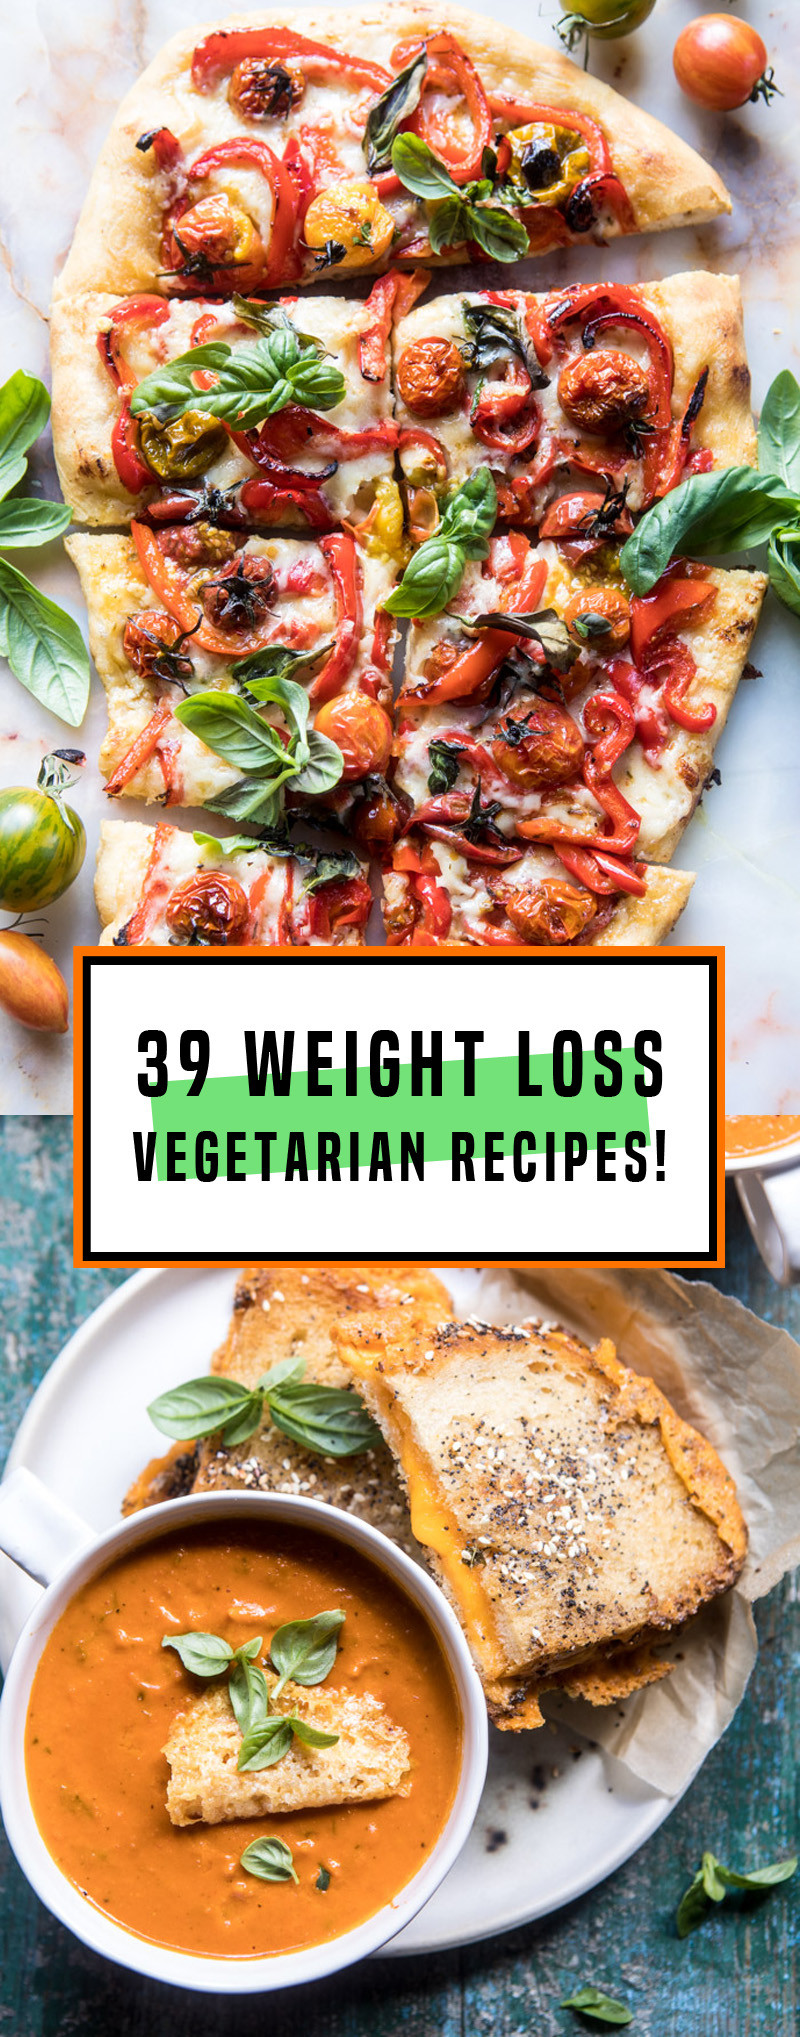 Tofu Weight Loss Recipes
 39 Ve arian Weight Loss Recipes That Are Healthy And